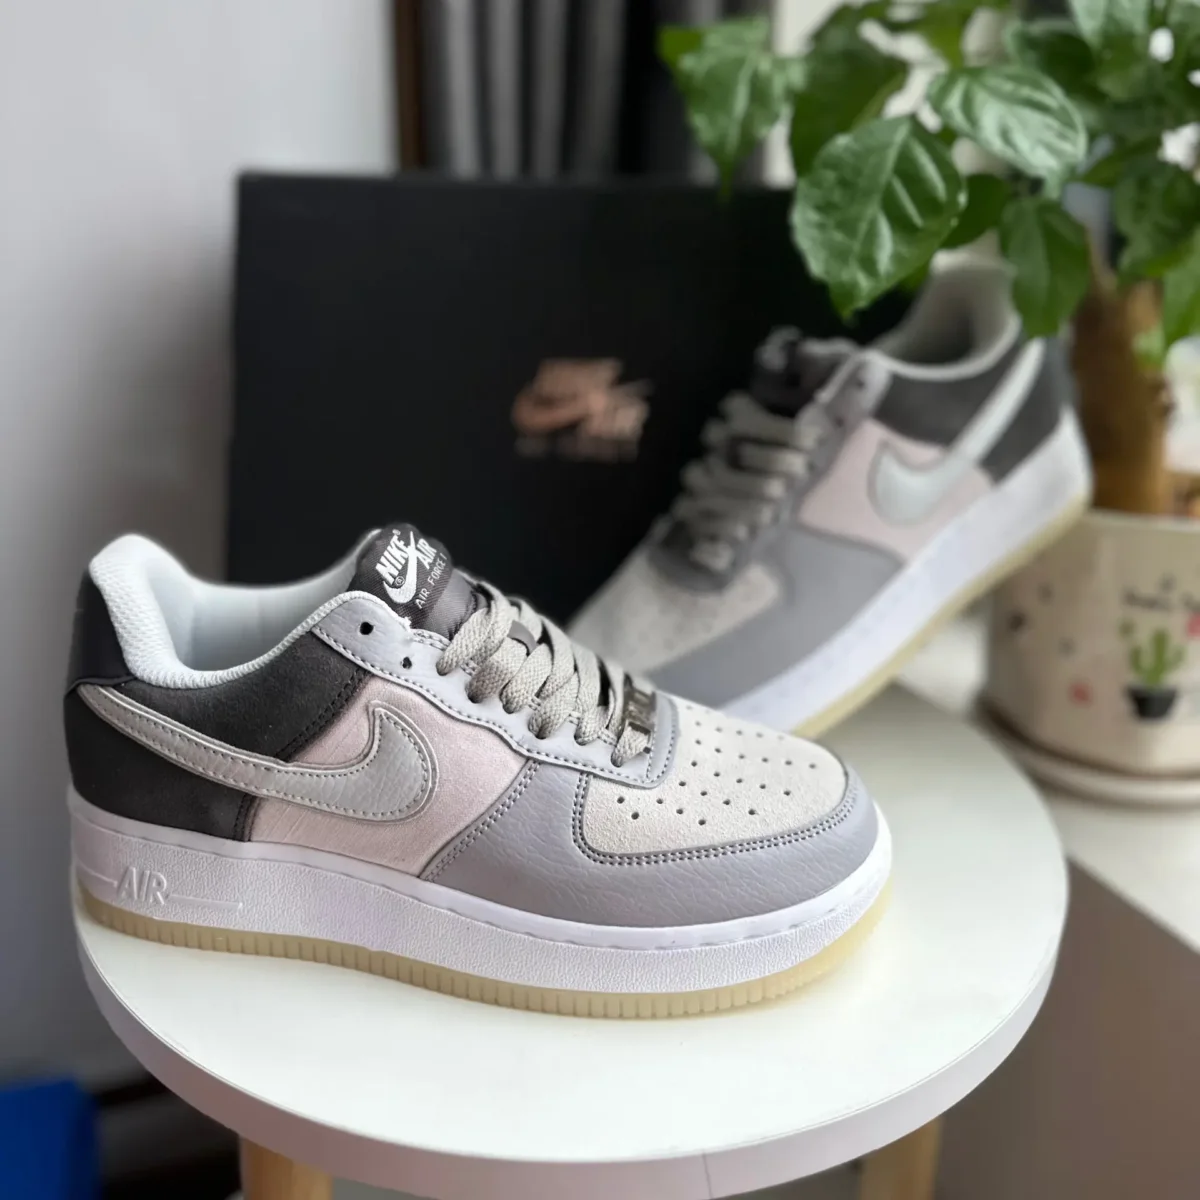 giày Nike Air Force 1 Low 07 LV8 2 Atmosphere Grey Thunder